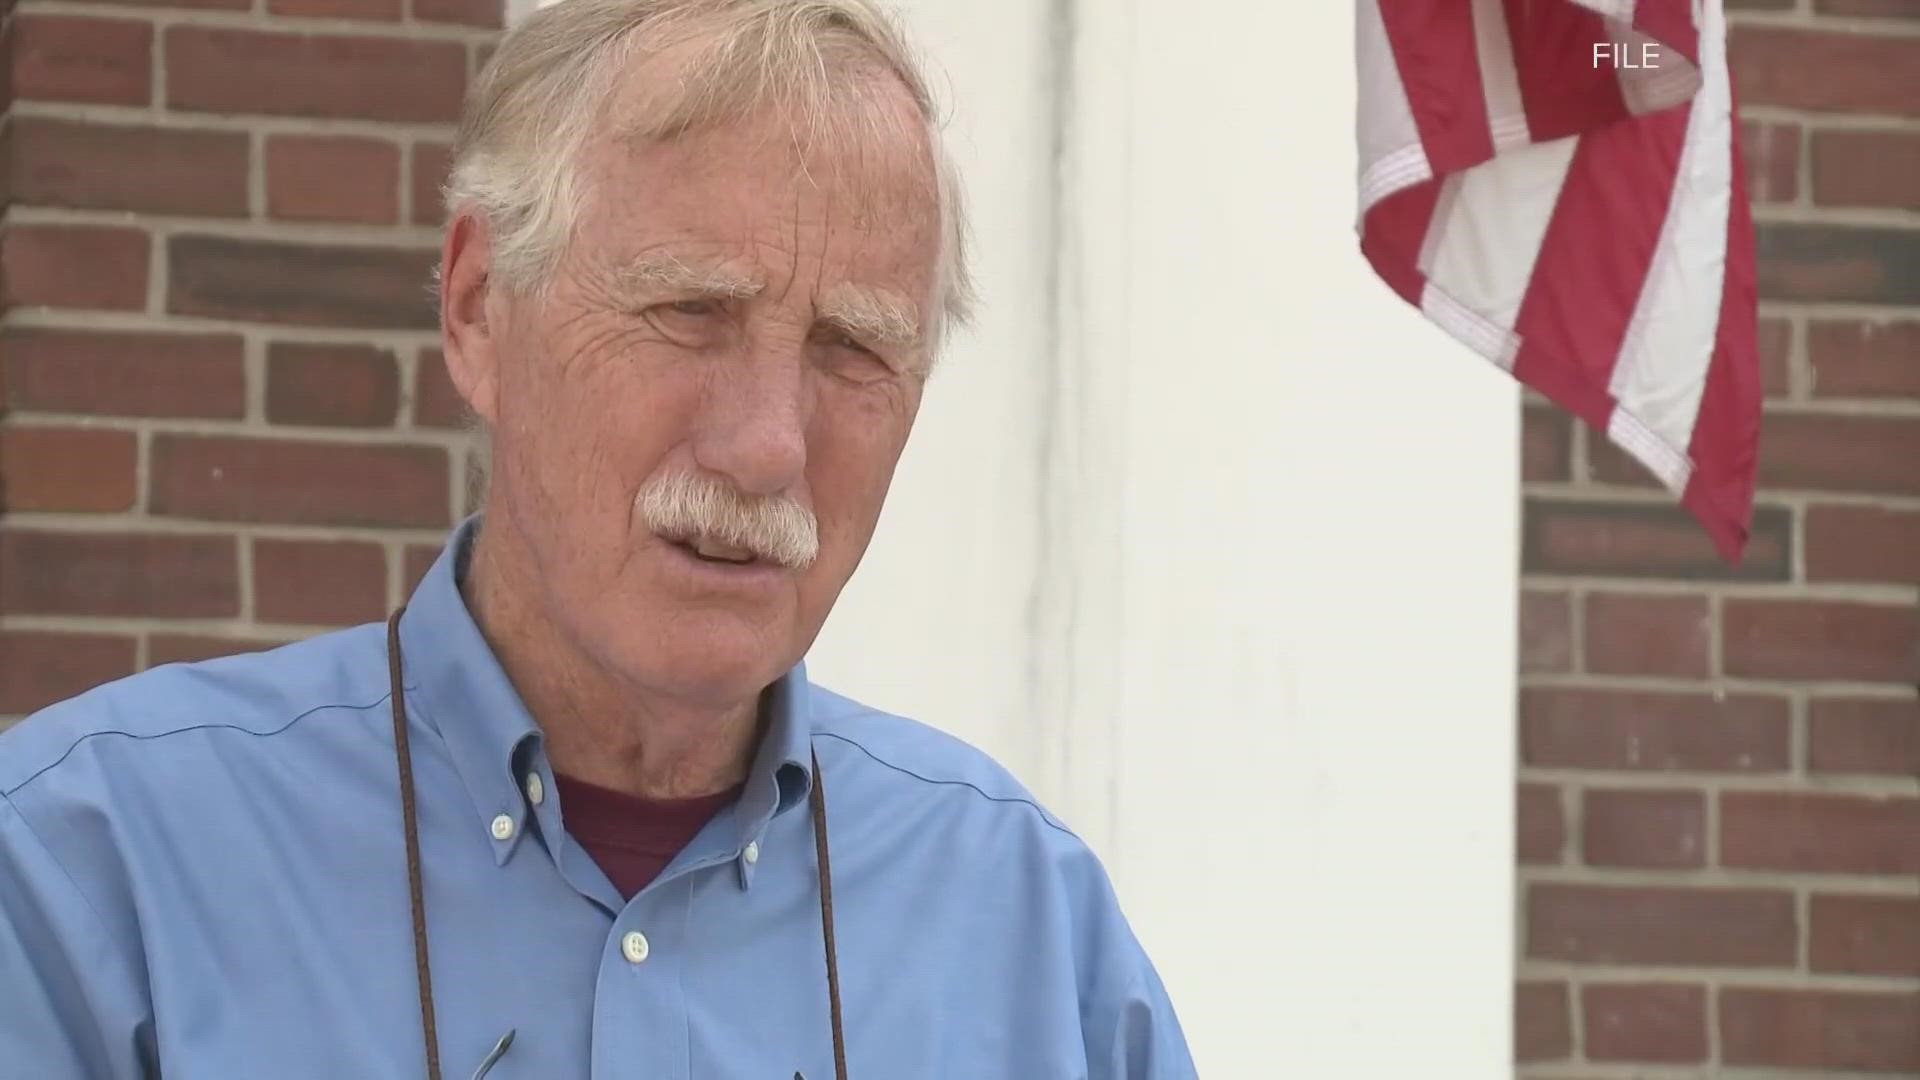 GOP leaders have reportedly accused U.S. Sen. Angus King's campaign of wrongfully flagging more than 350 Twitter accounts back in 2018.